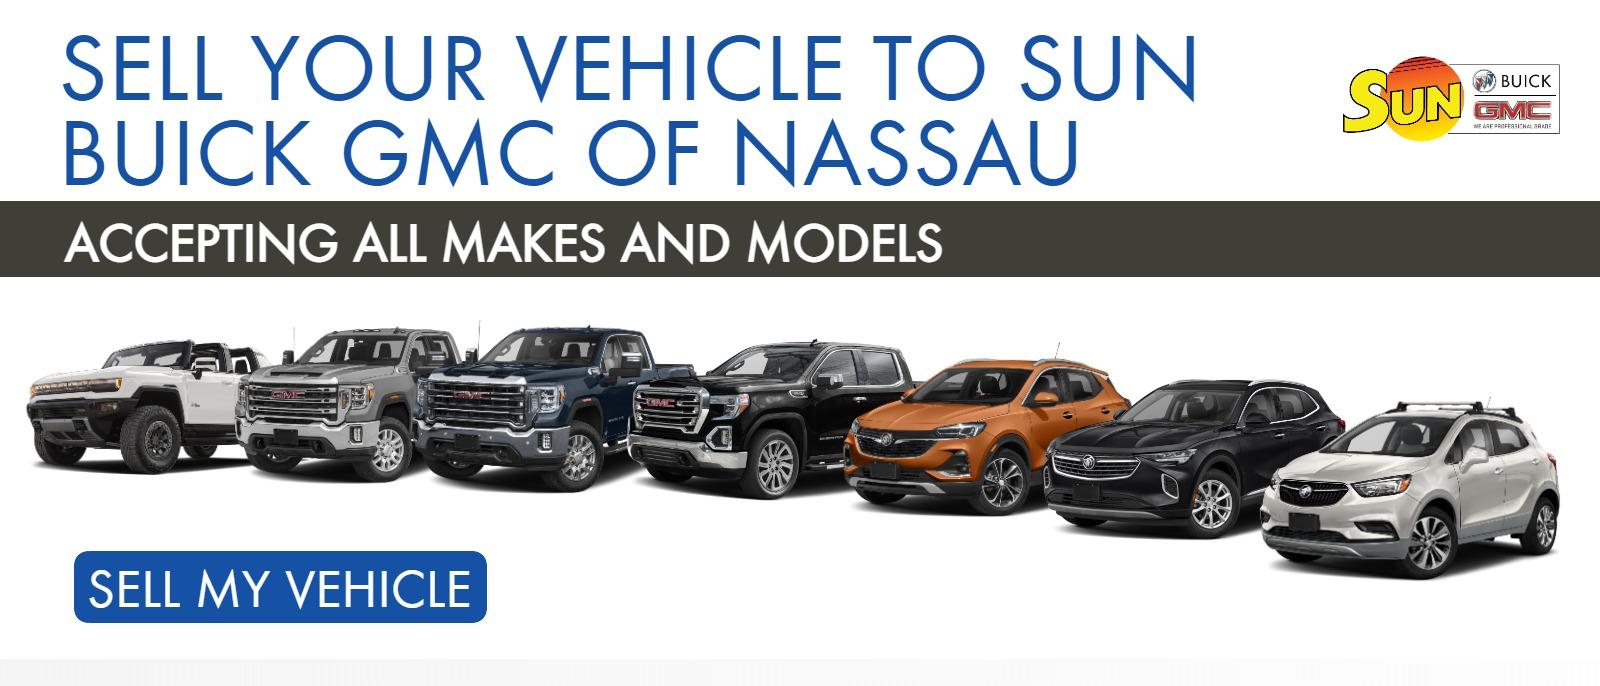 SELL YOUR VEHICLE TO SUN BUICK GMC OF NASSAU
ACCEPTING ALL MAKES AND MODELS